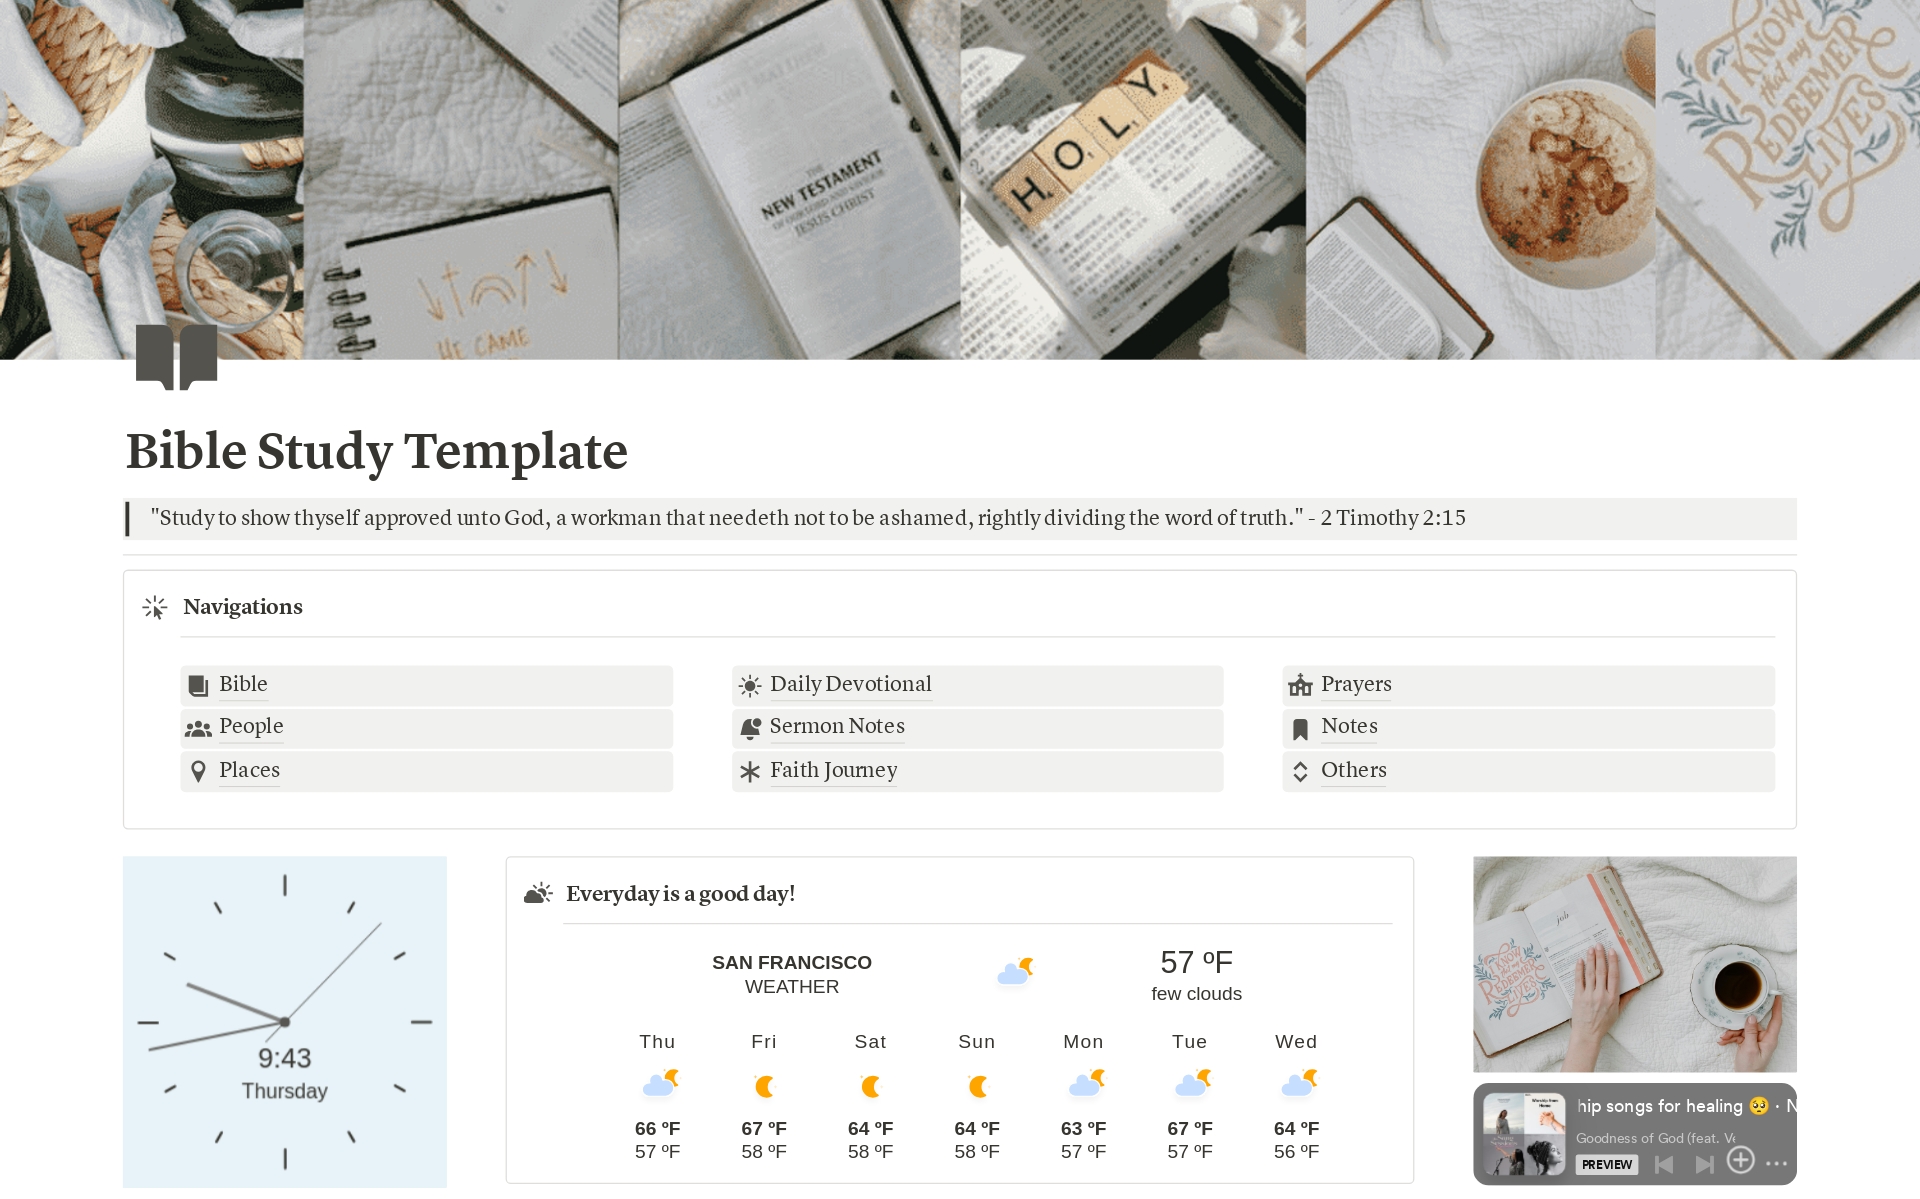 Bible Study Notion Template: Simplify and Enhance Your Spiritual Journey

Are you looking to bring more structure and inspiration to your Bible study routine? Our Bible Study Notion Template is here to help you stay organized, focused, and motivated on your spiritual journey. D